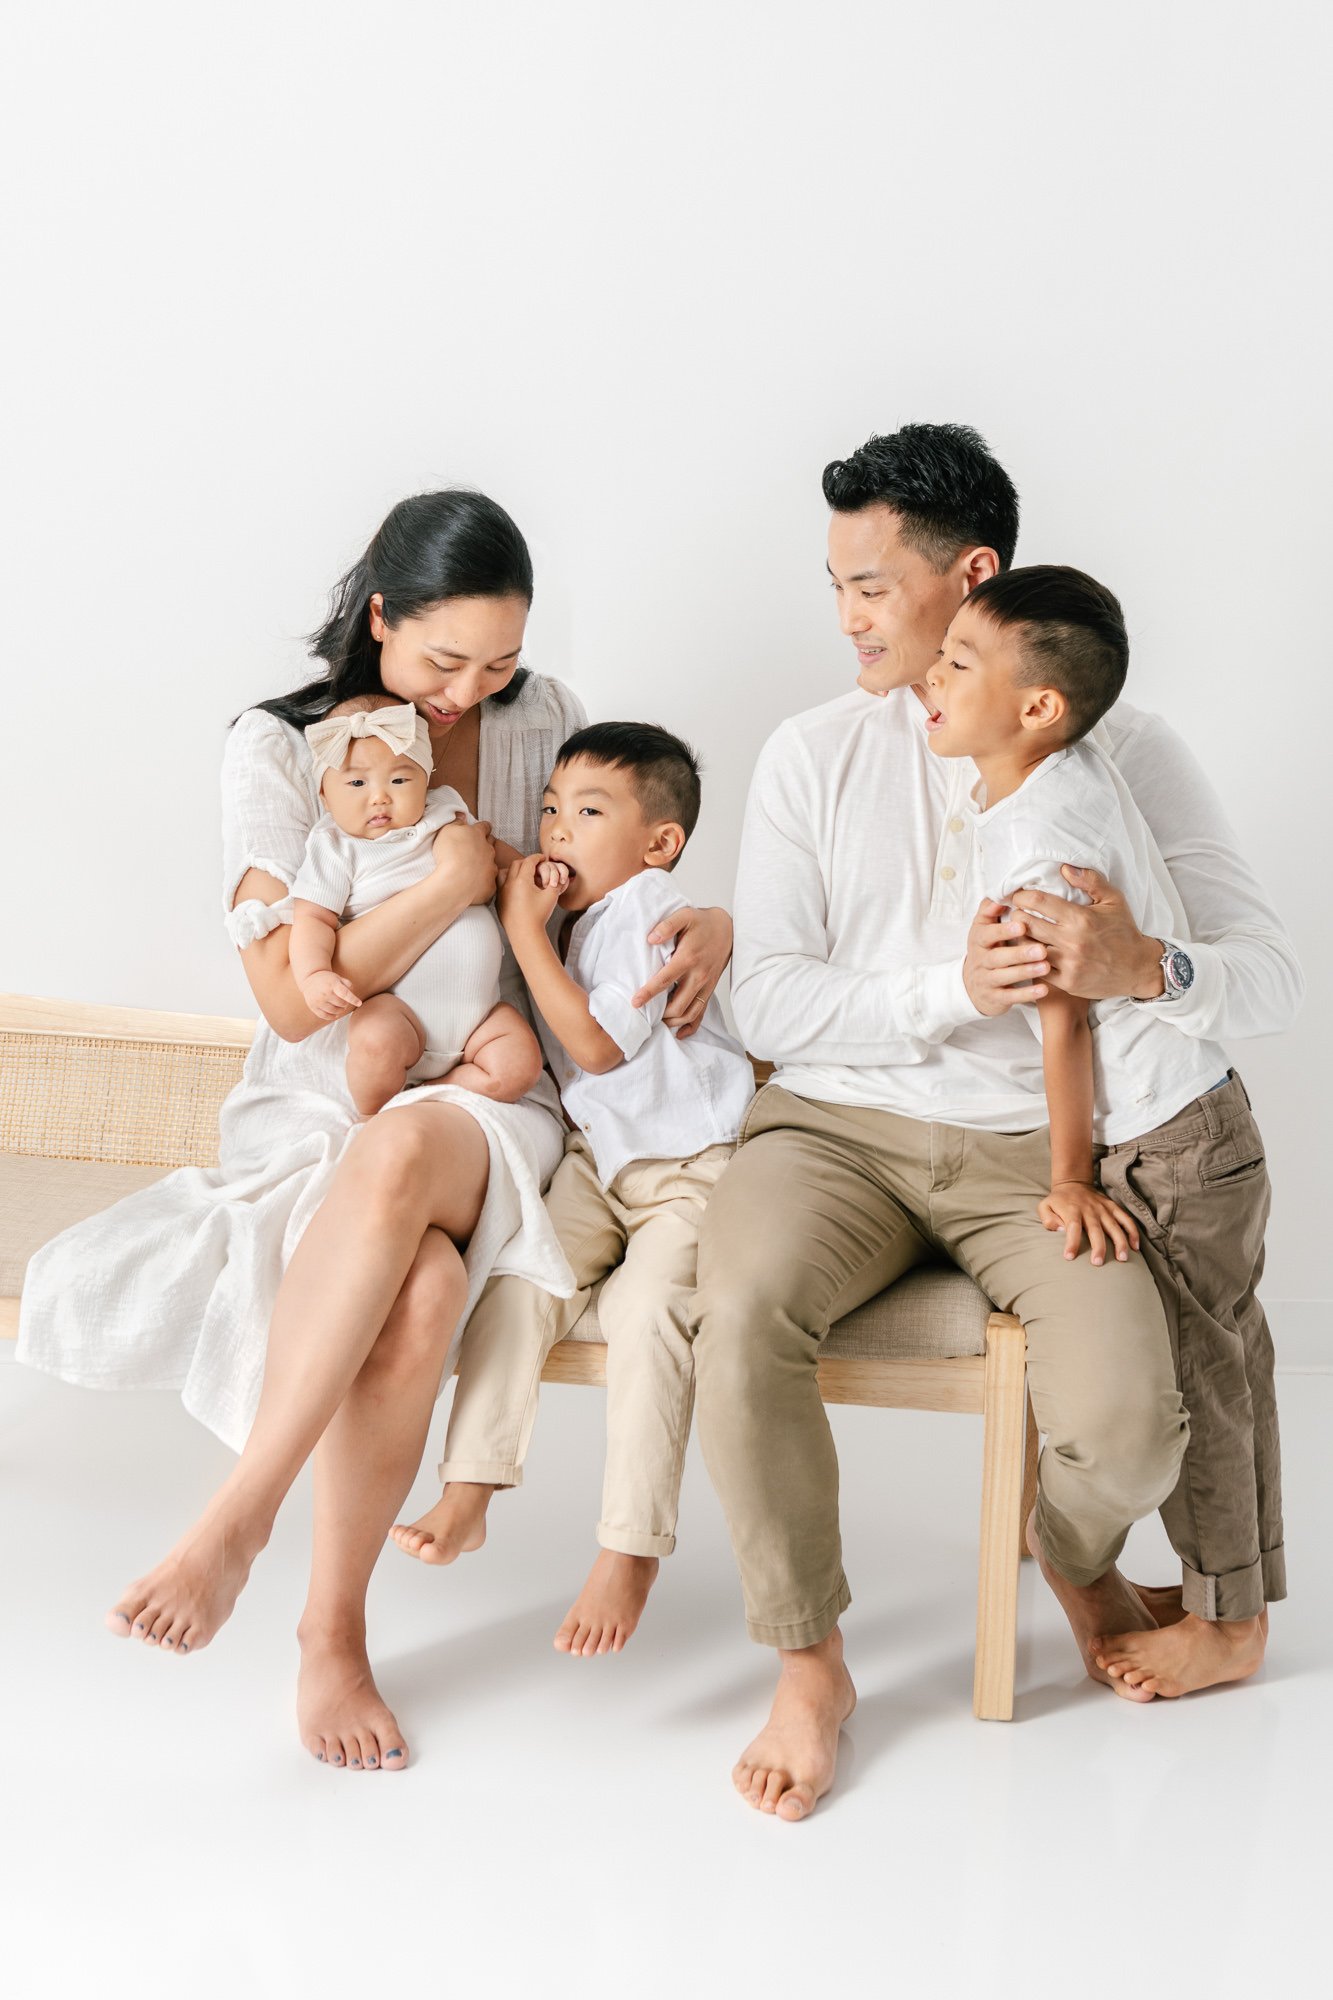    Family sits on a bench tucked in close together. Baby sister looks directly at camera. Brothers look to parents. Dad places arm around one son in newborn family photoshoot captured by Nicole Hawkins Photography #studionewborns #studioportraits #ba